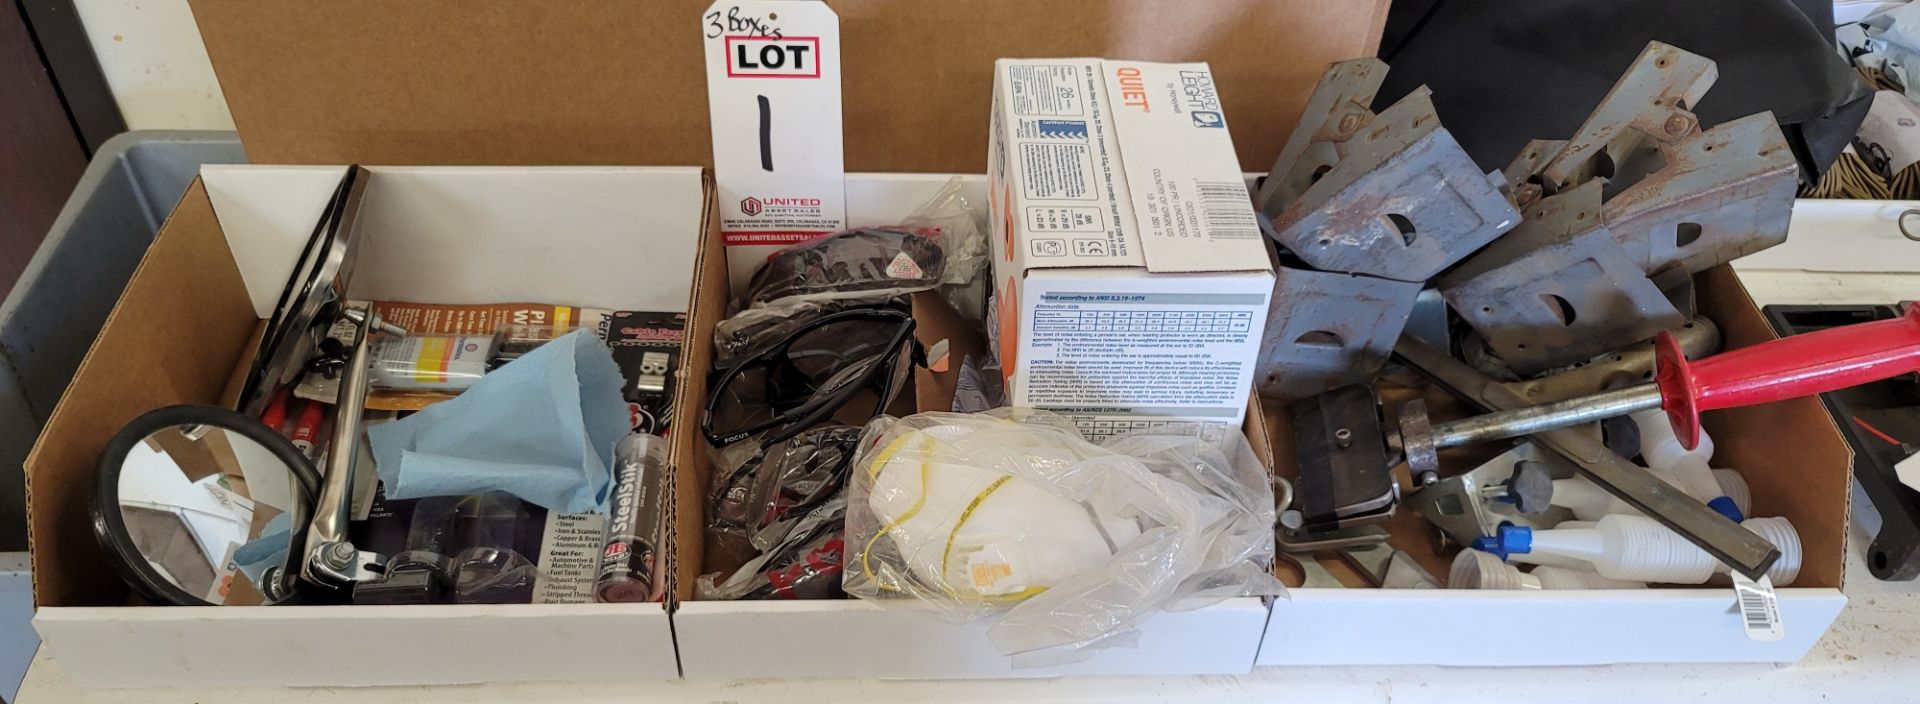 LOT - (3) BOXES OF MISC ITEMS, TO INCLUDE: REAR VIEW MIRRORS, ADHESIVES, SAFETY GLASSES, EAR